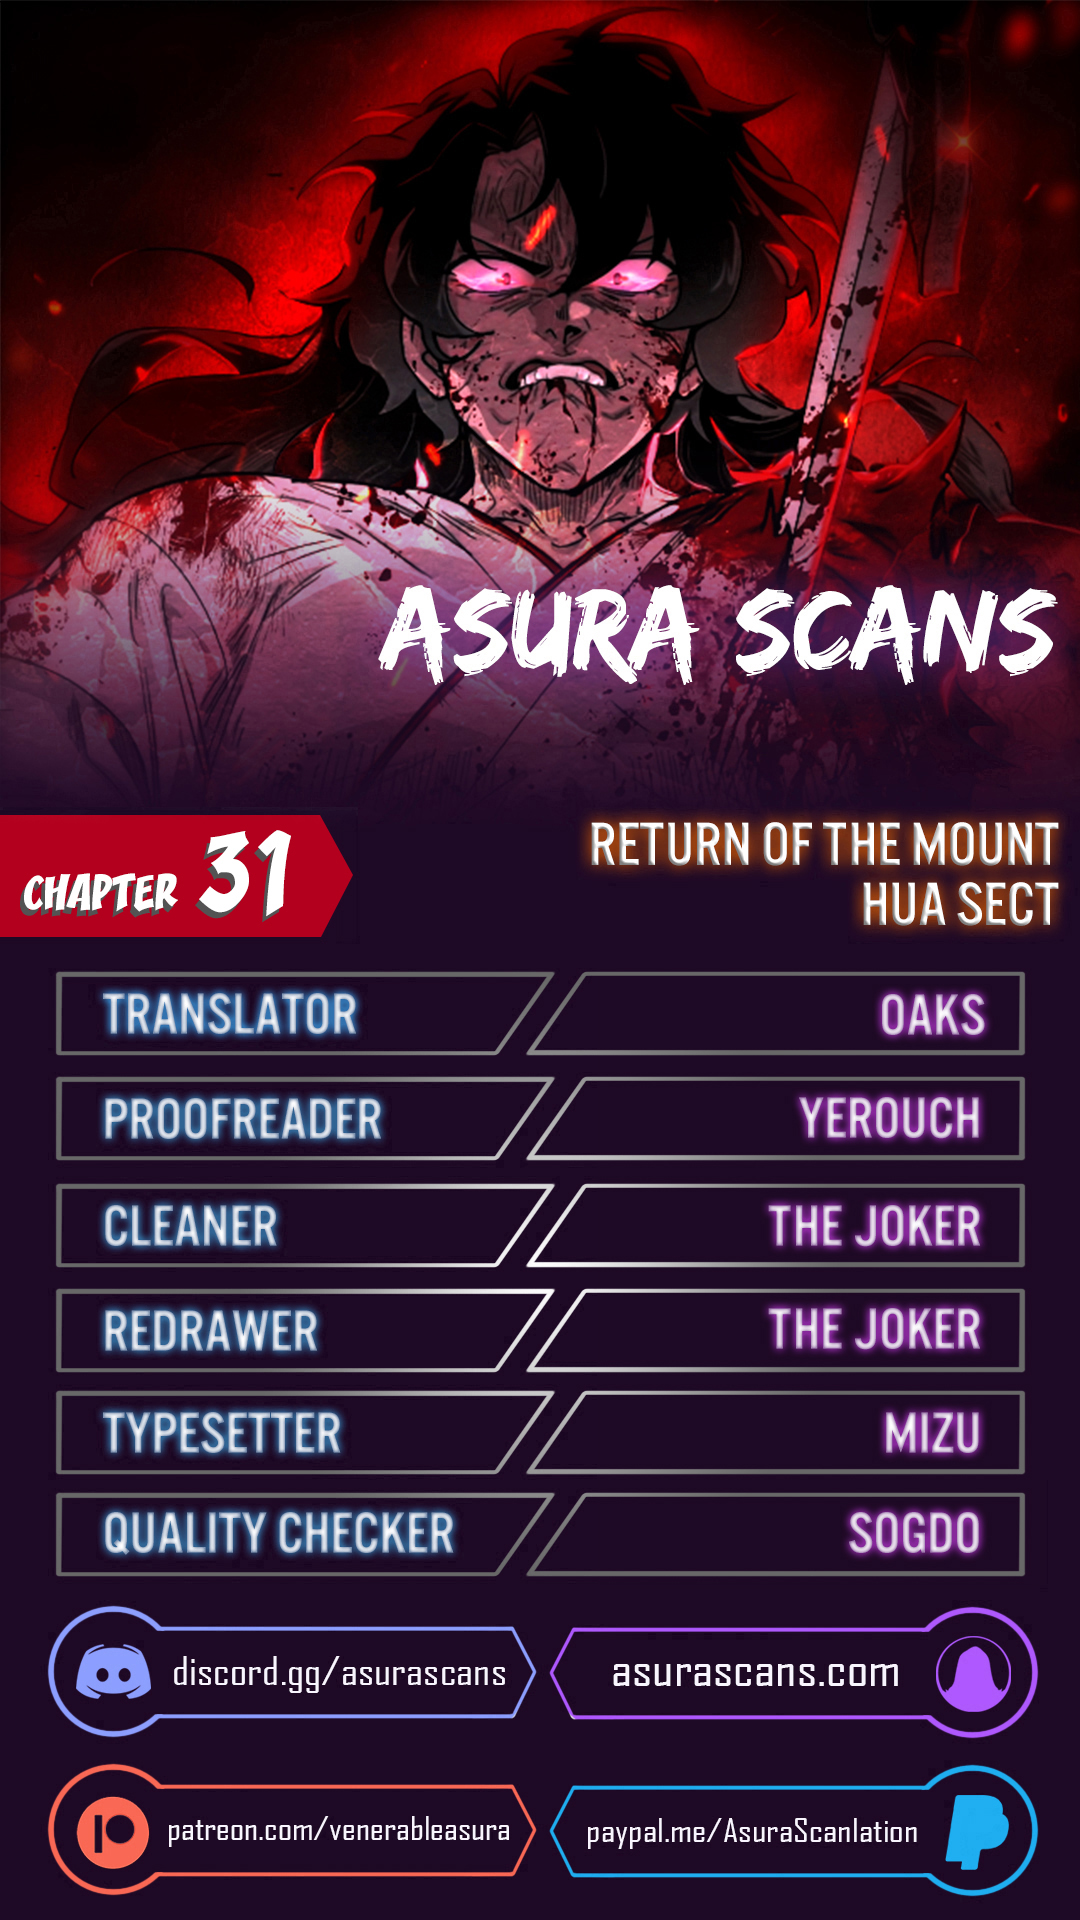 Return of the Mount Hua Sect - Chapter 11655 - Image 1